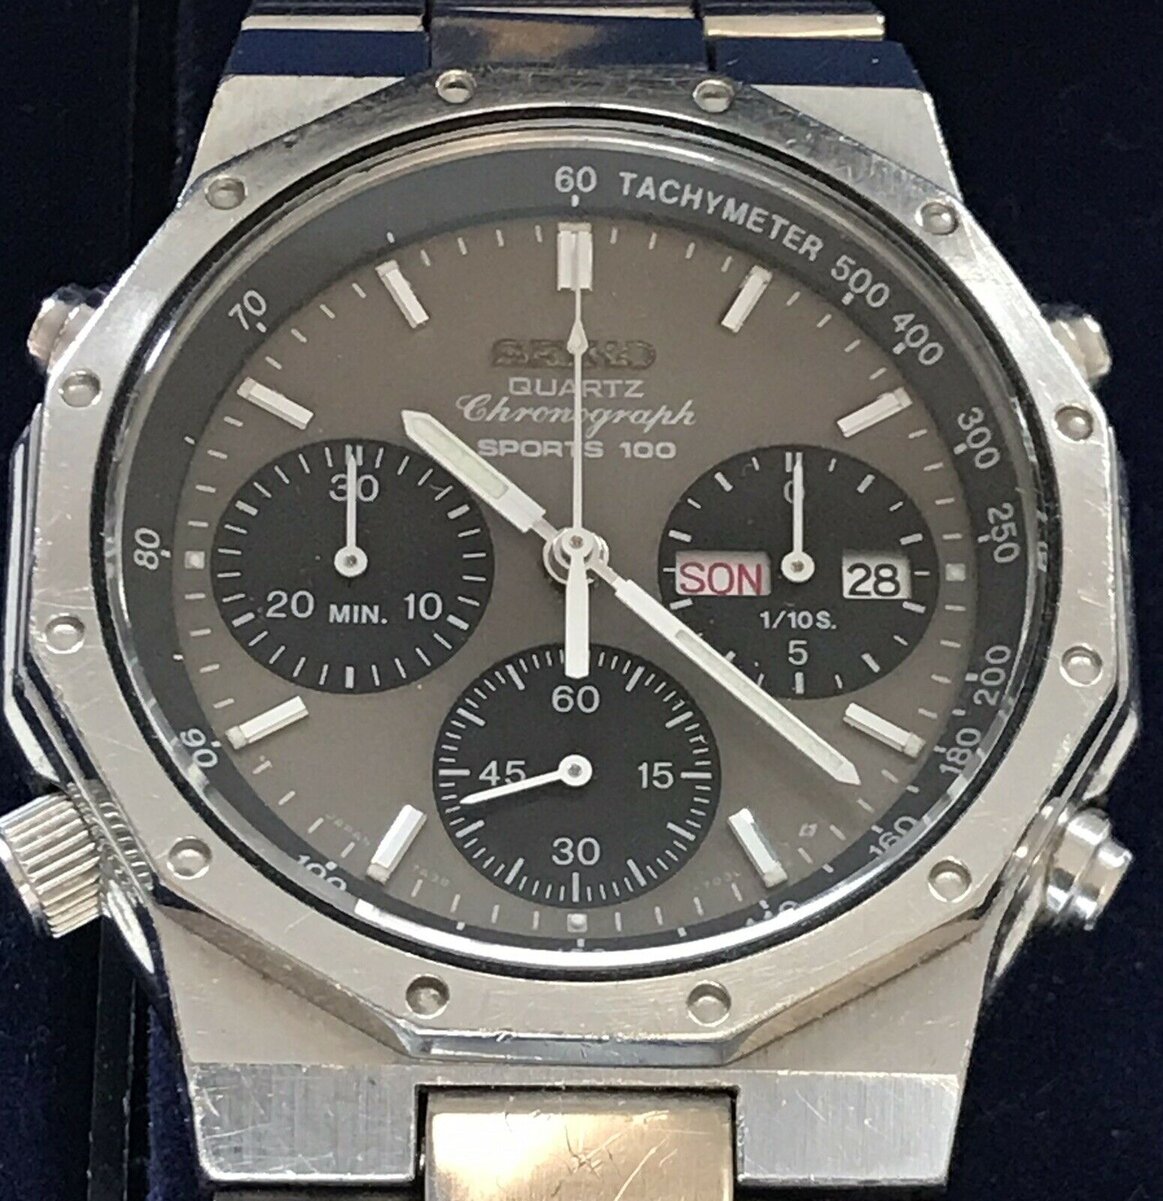 rsz_7a38-7020-stainless-grey-ebaygermany-march2021-re-seller-andanother-2.jpg